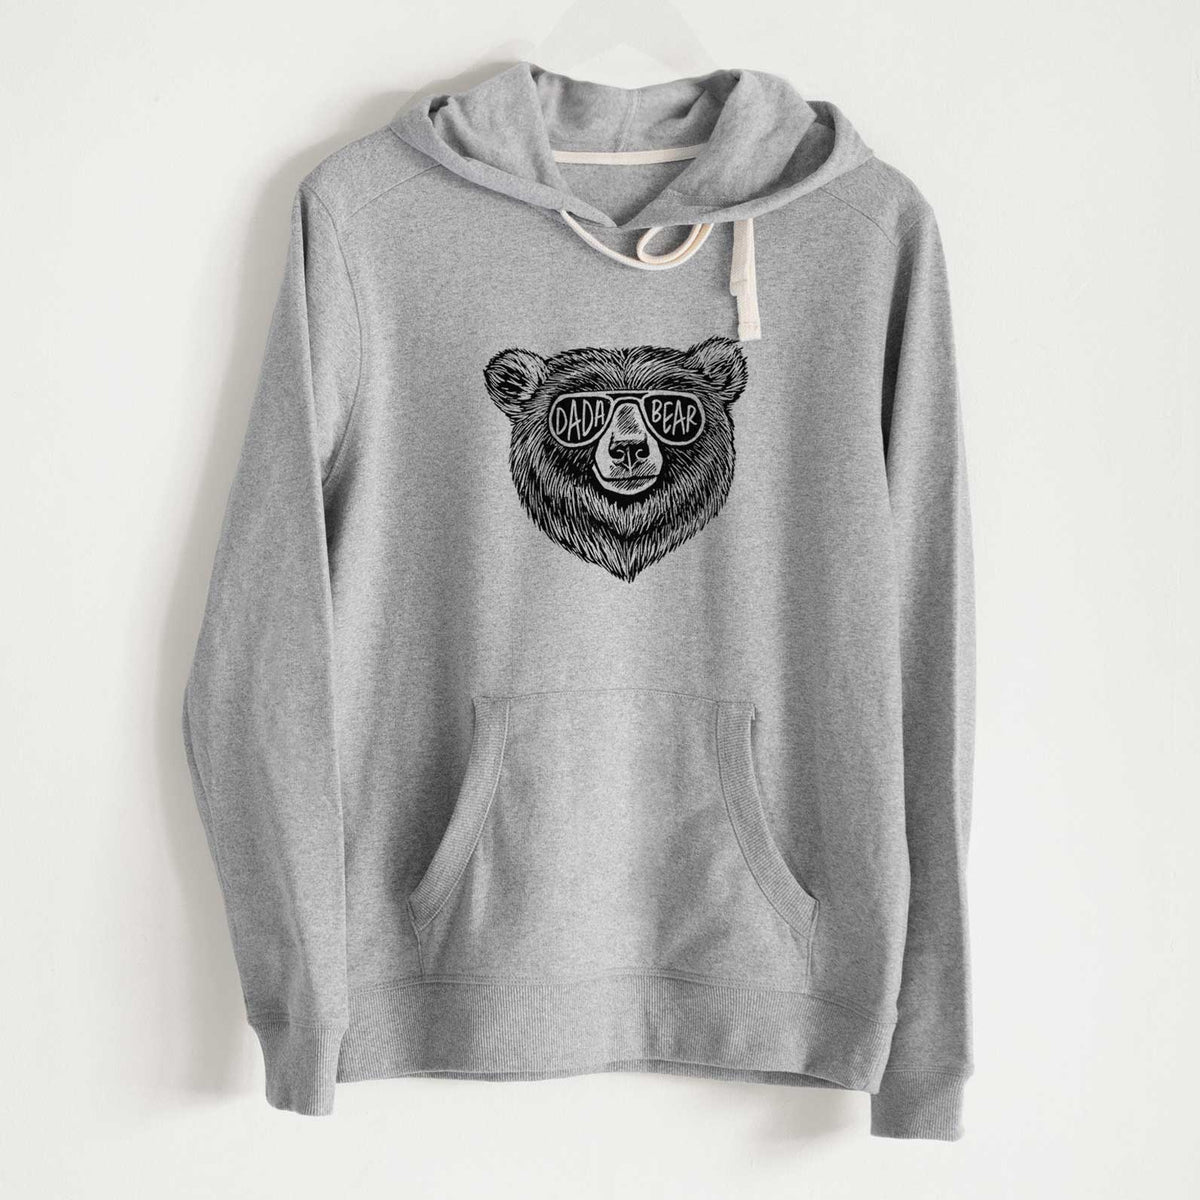 Dada Bear - Unisex Recycled Hoodie - CLOSEOUT - FINAL SALE